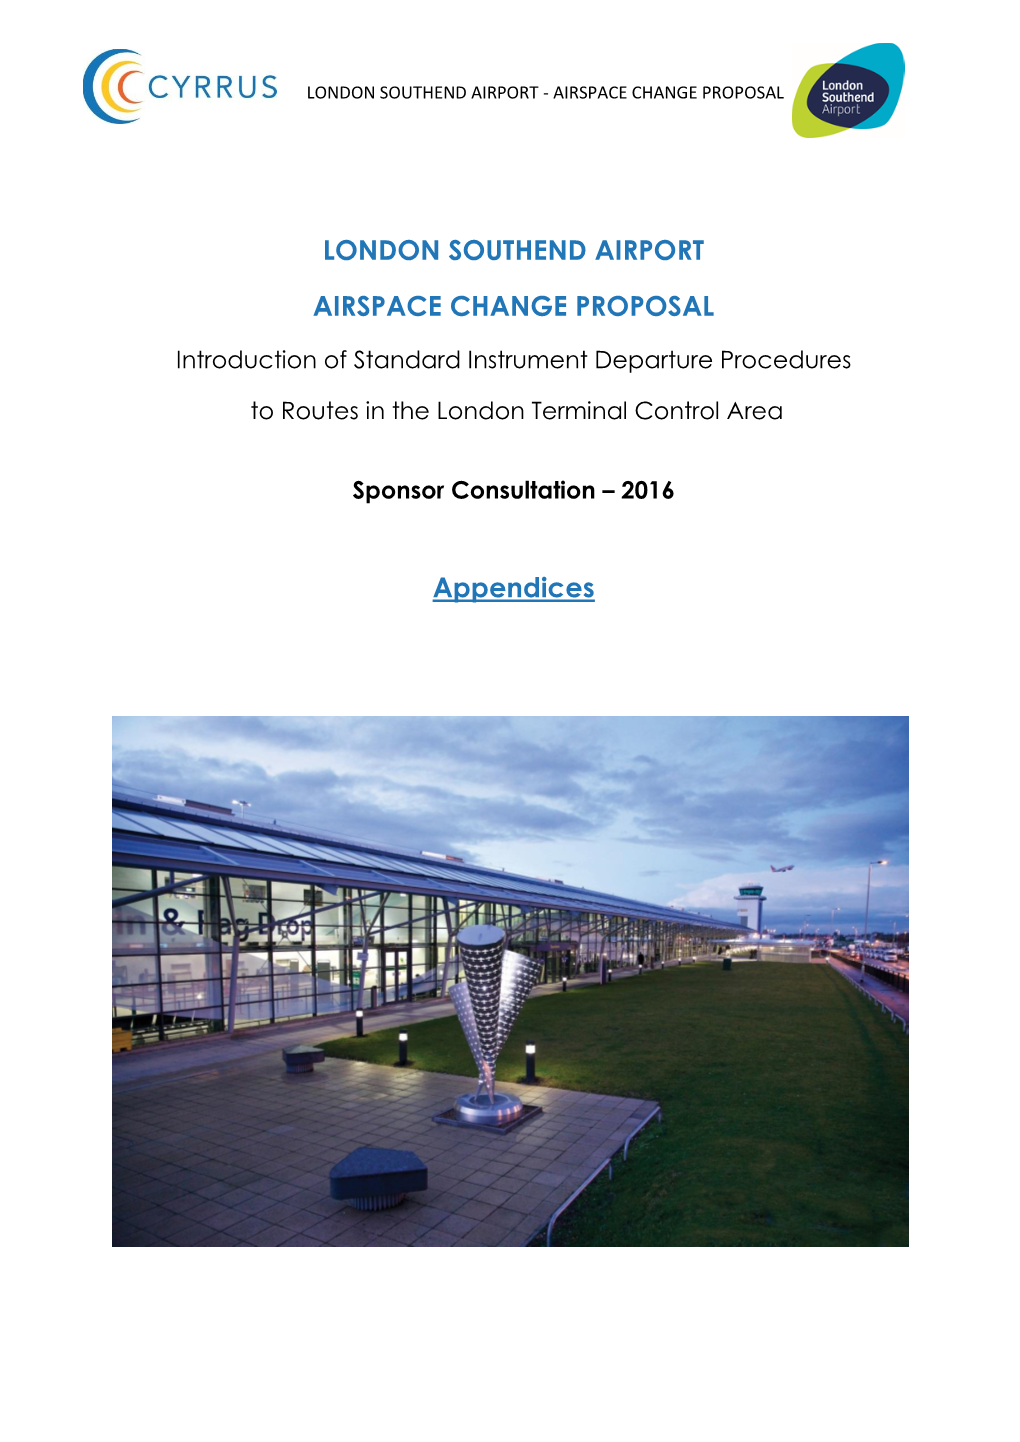 London Southend Airport Airspace Change Proposal